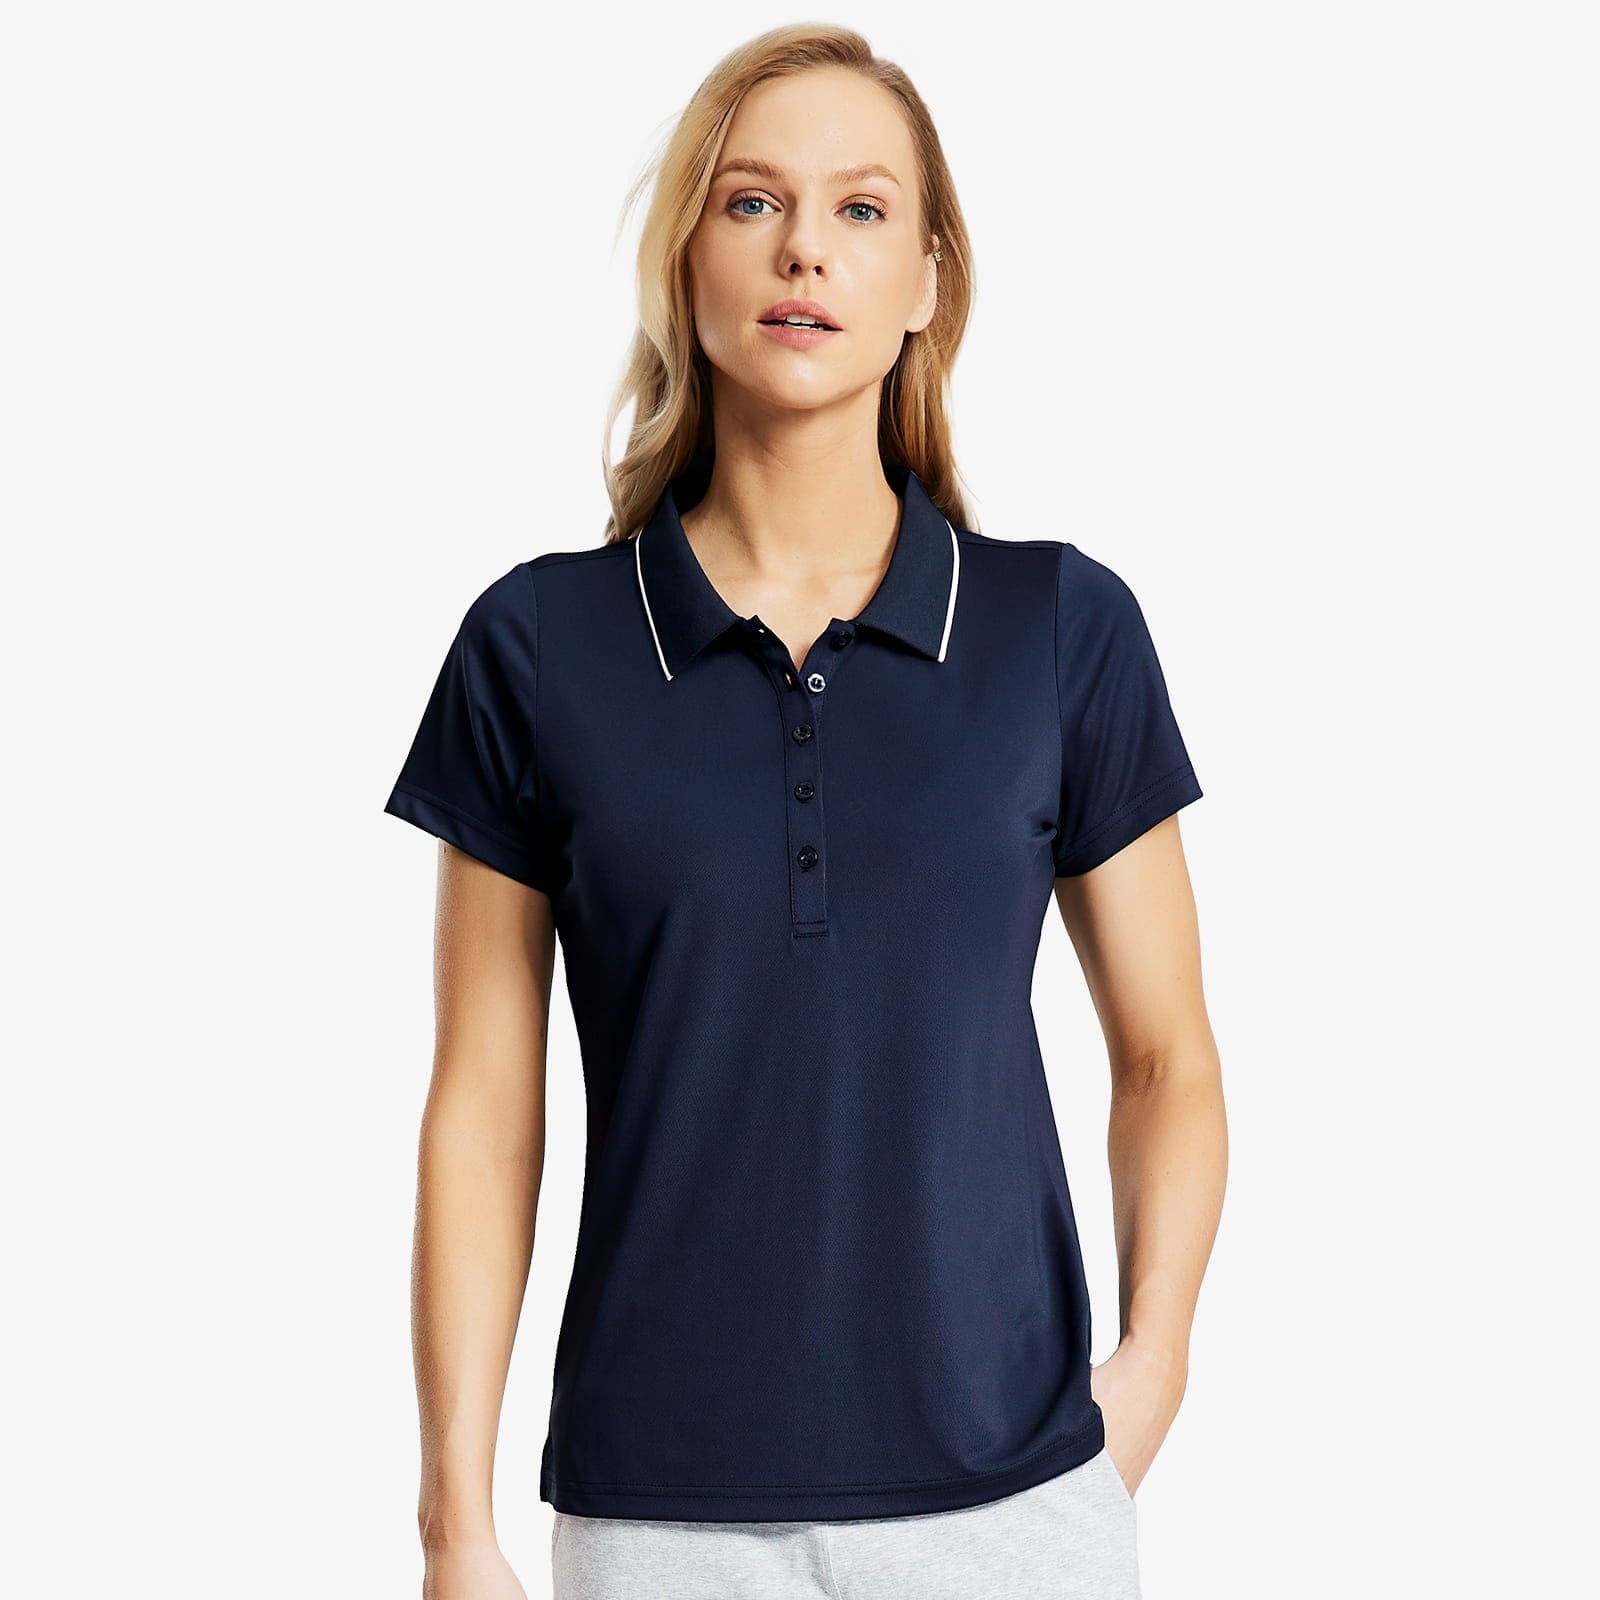 Women's Polo Shirts Short Sleeve Moisture Wicking Collared Tshirts Women Polo Navy / S MIER